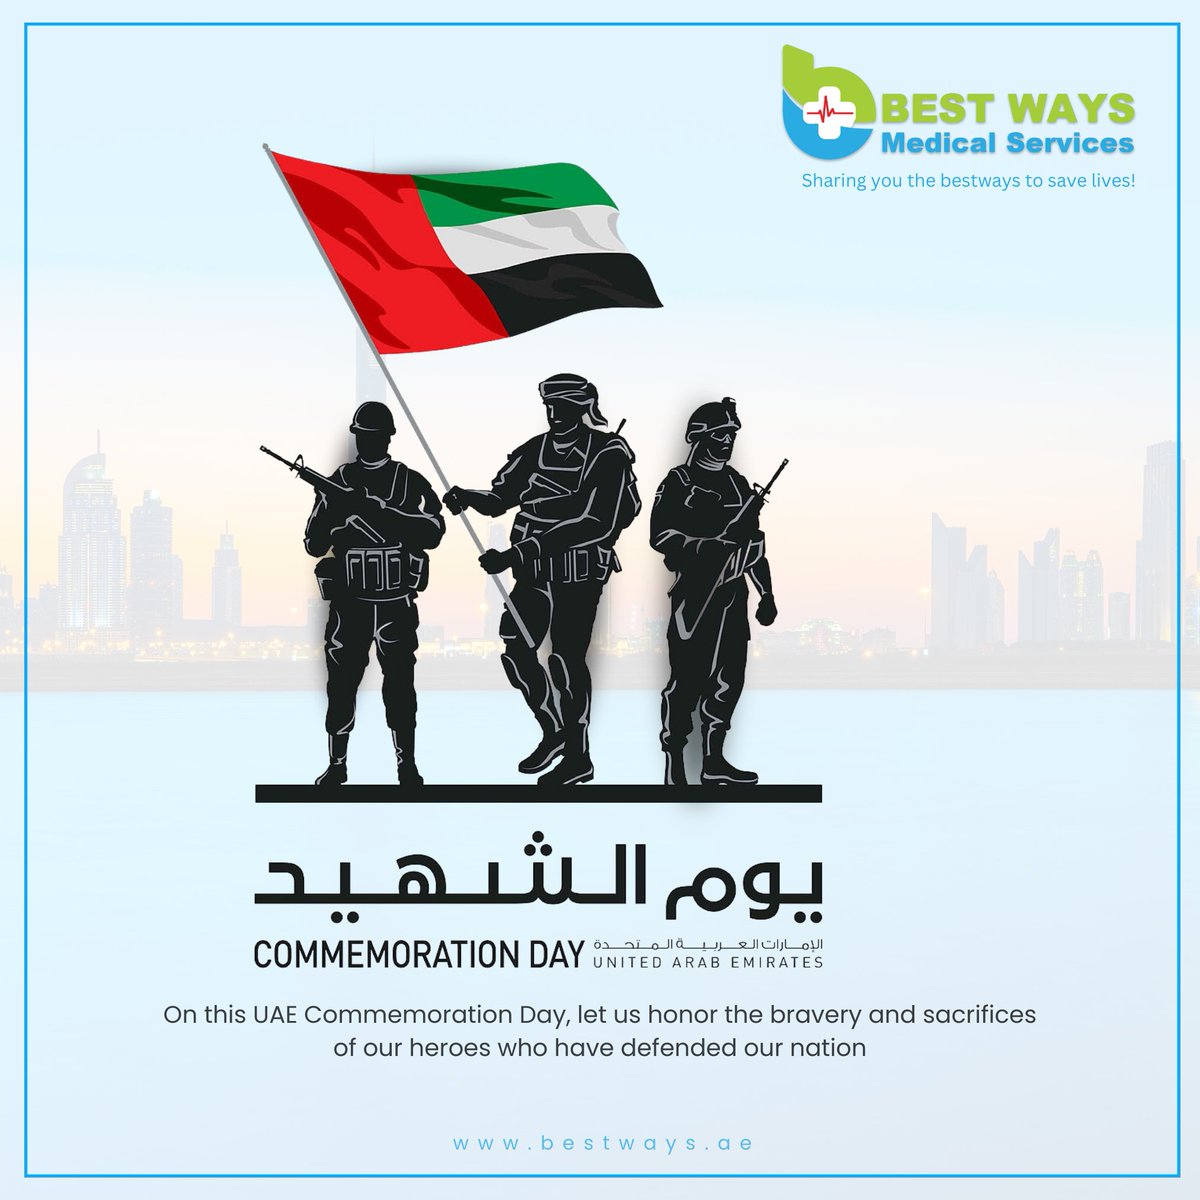 On this UAE Commemoration Day, let us honor the bravery and sacrifices of our heroes who have defended our nation.
#CommemorationDay #UAECommemorationDay #WeRemember #HonorOurHeroes #MartyrsDay #UAEHeroes #NeverForget #RememberingTheBrave #ThankYouHeroes #UAEGratitude